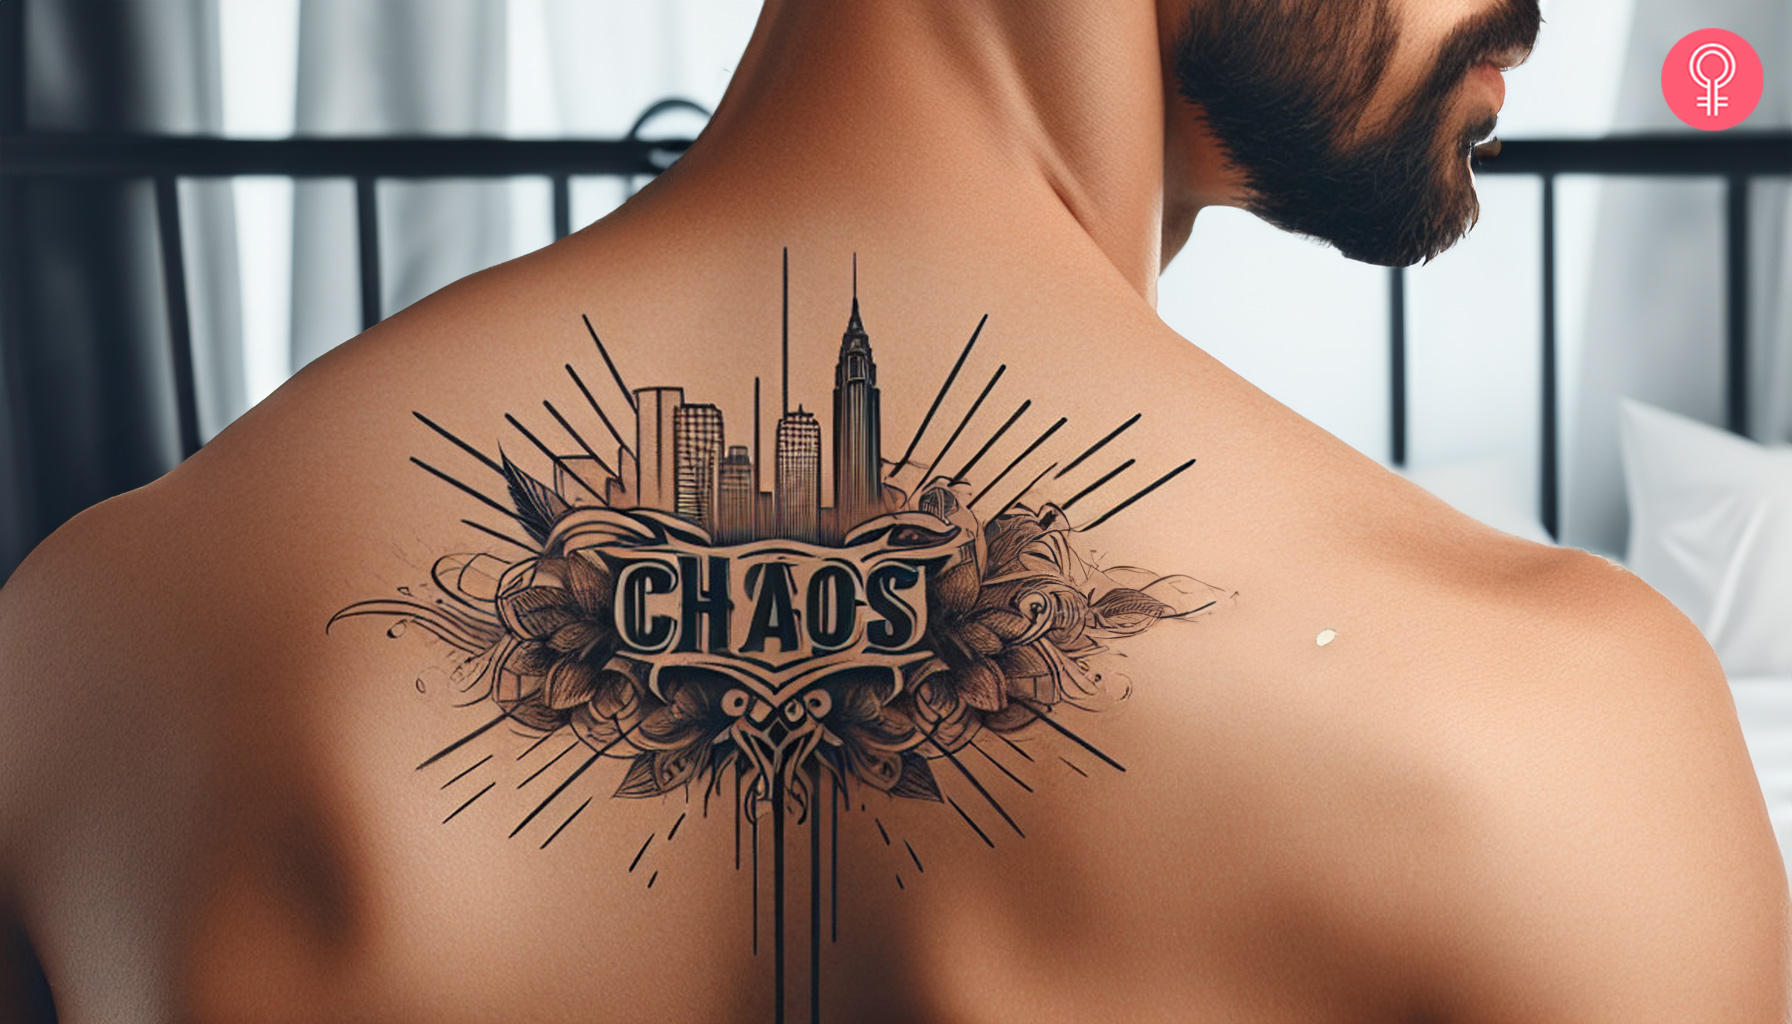 A Chicano graffiti tattoo on a man’s back with the word ‘Chaos’